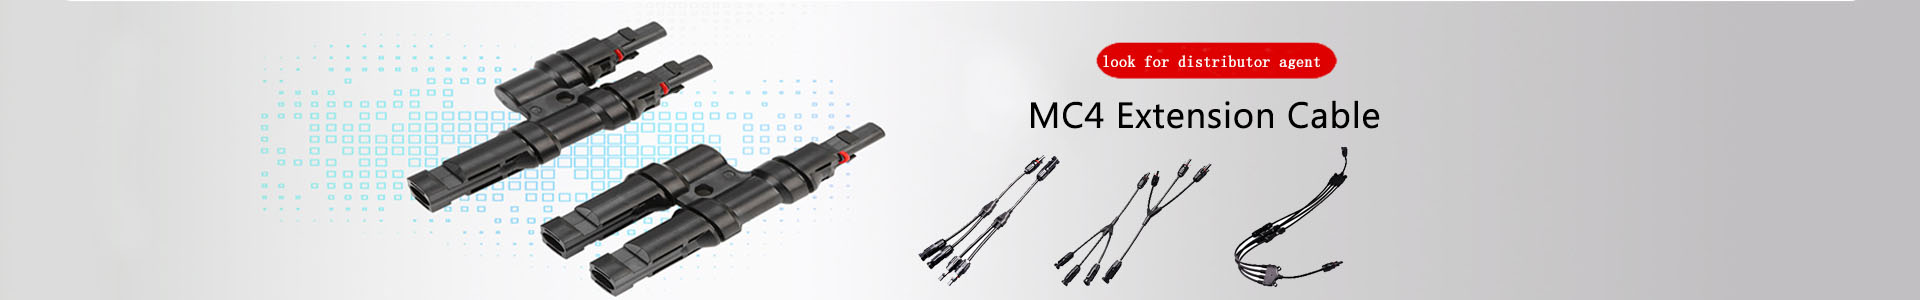 How to properly install MC4 connector?-Company news-Solar | solar connector,solar branch connector,diode fuse connector,MC4 extnsion cable,H1Z2Z2 solar cable, UL4703 solar cable | Leading manufacturer and supplier of solar pv cables and connectors